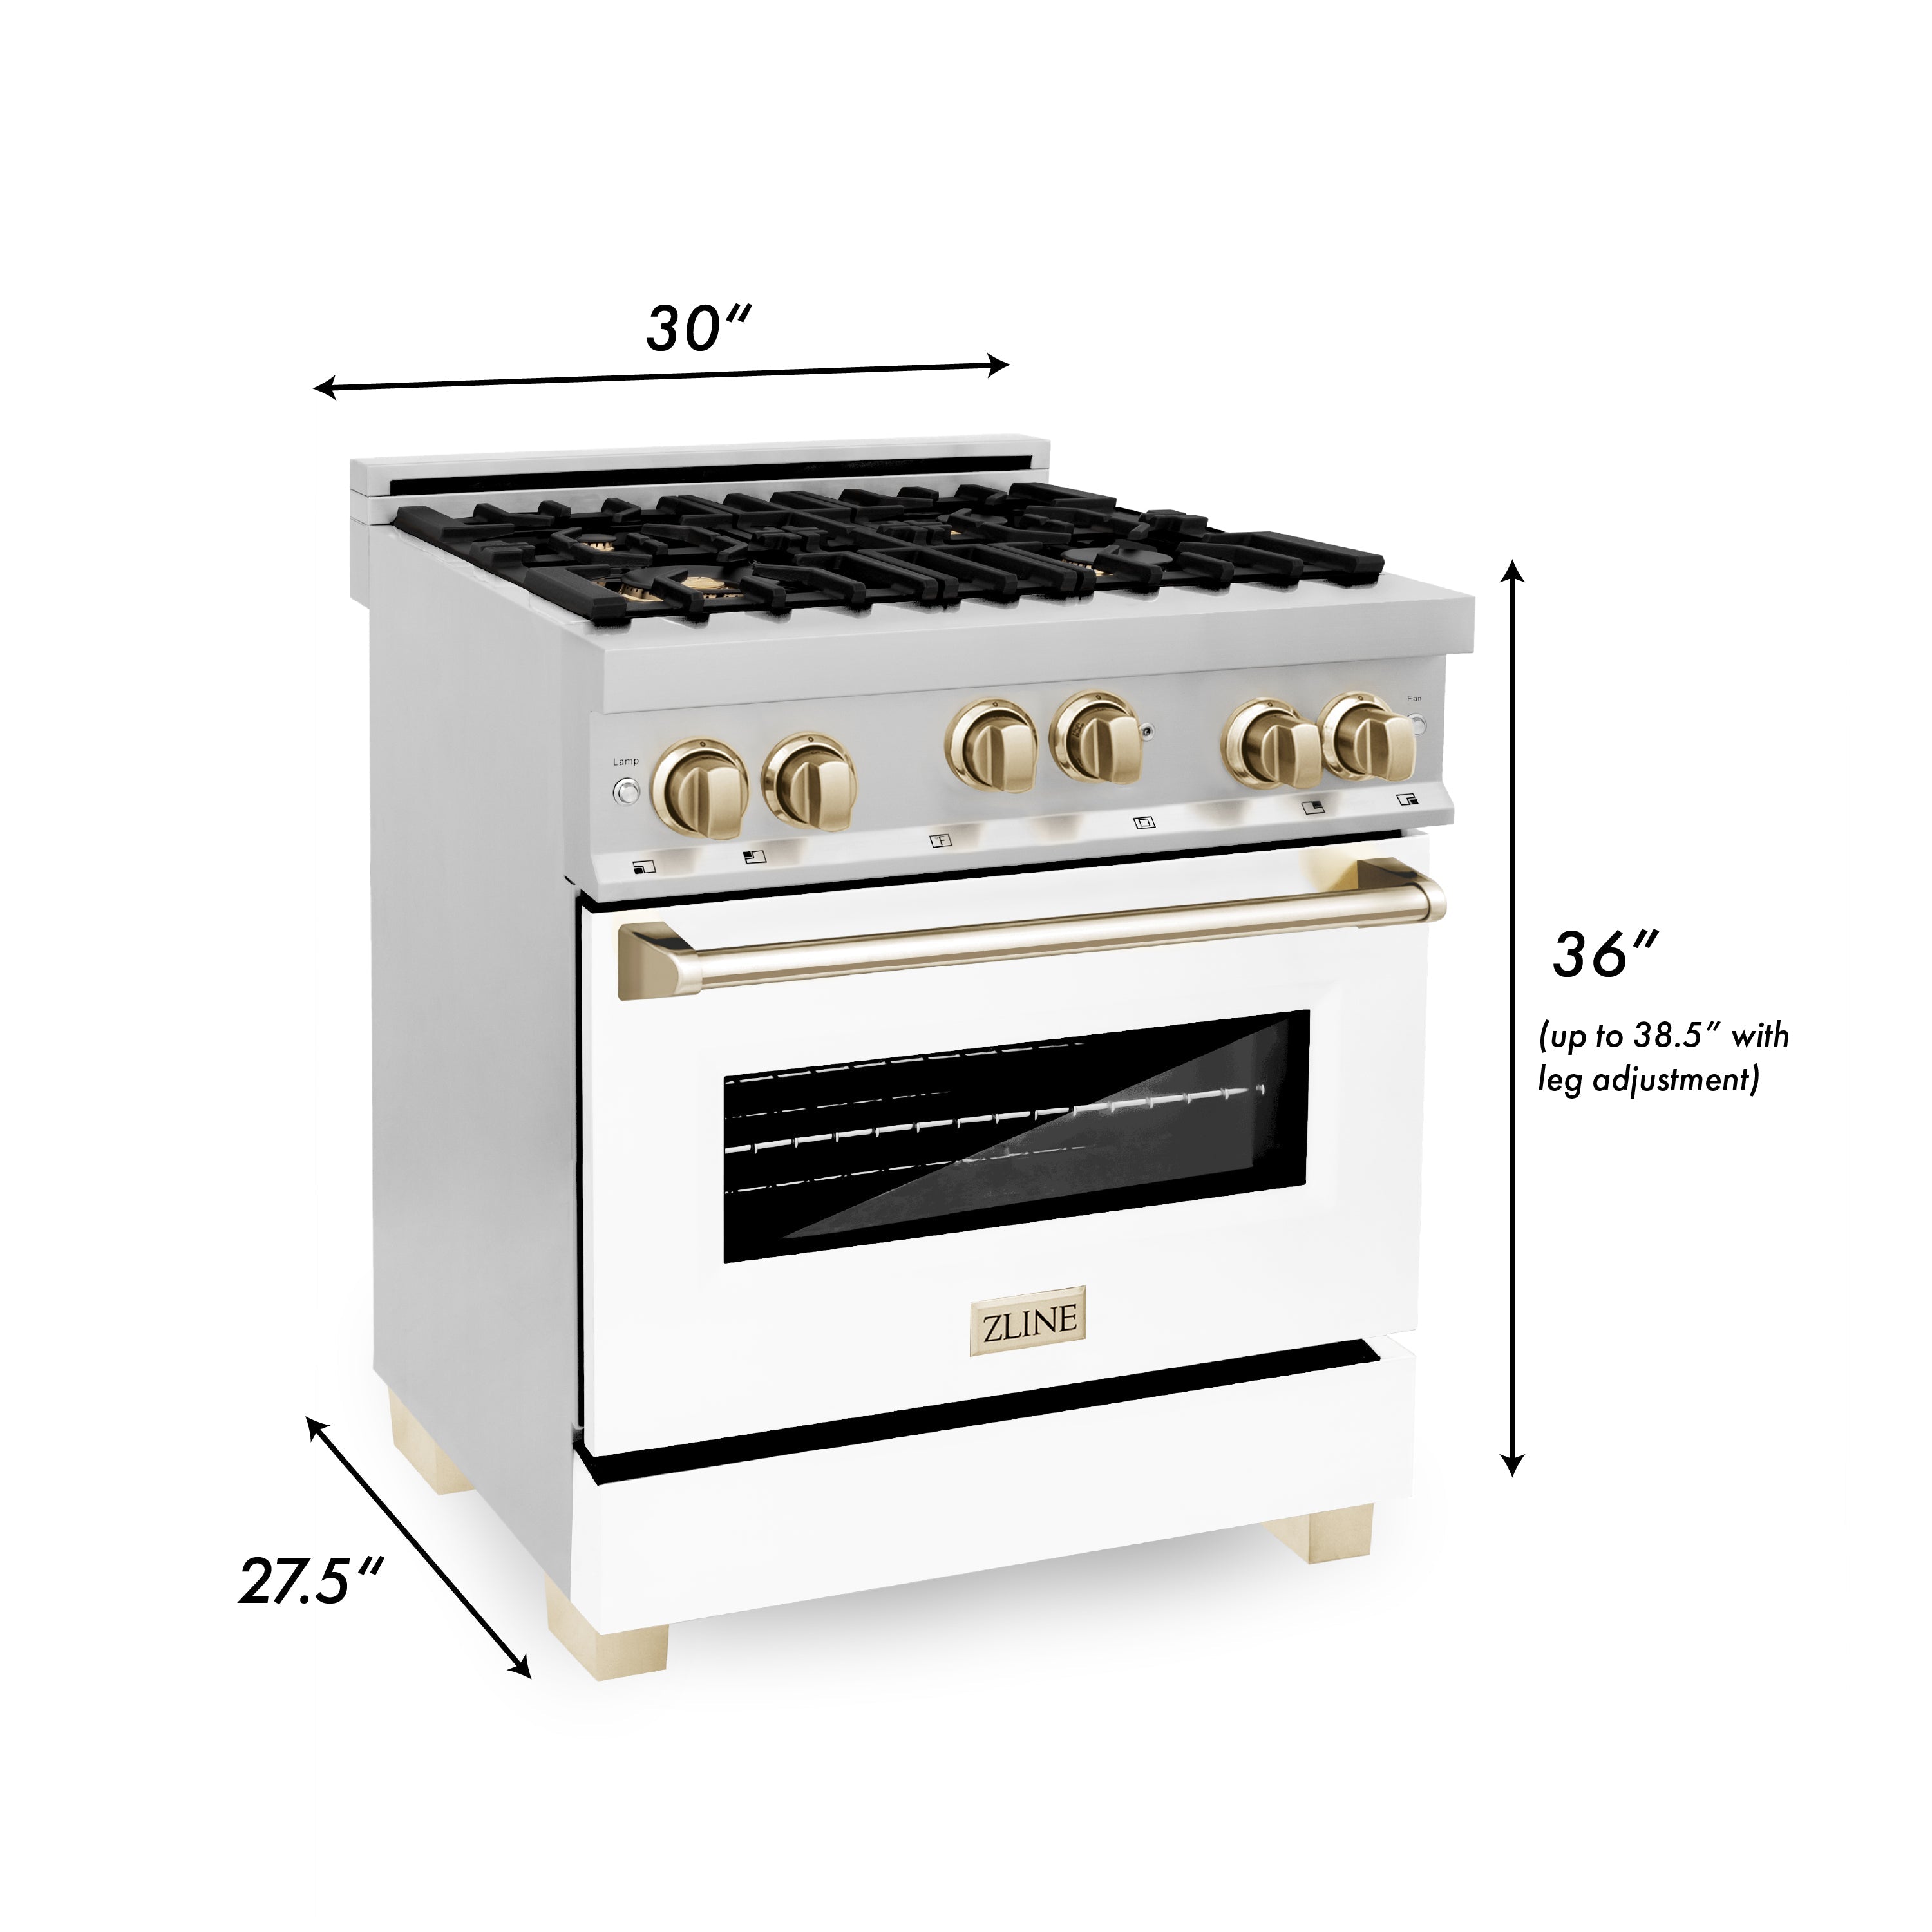 ZLINE Autograph Edition 30 in. 4.0 cu. ft. Range with Gas Stove and Gas Oven in Stainless Steel with White Matte Door and Accents (RGZ-WM-30)